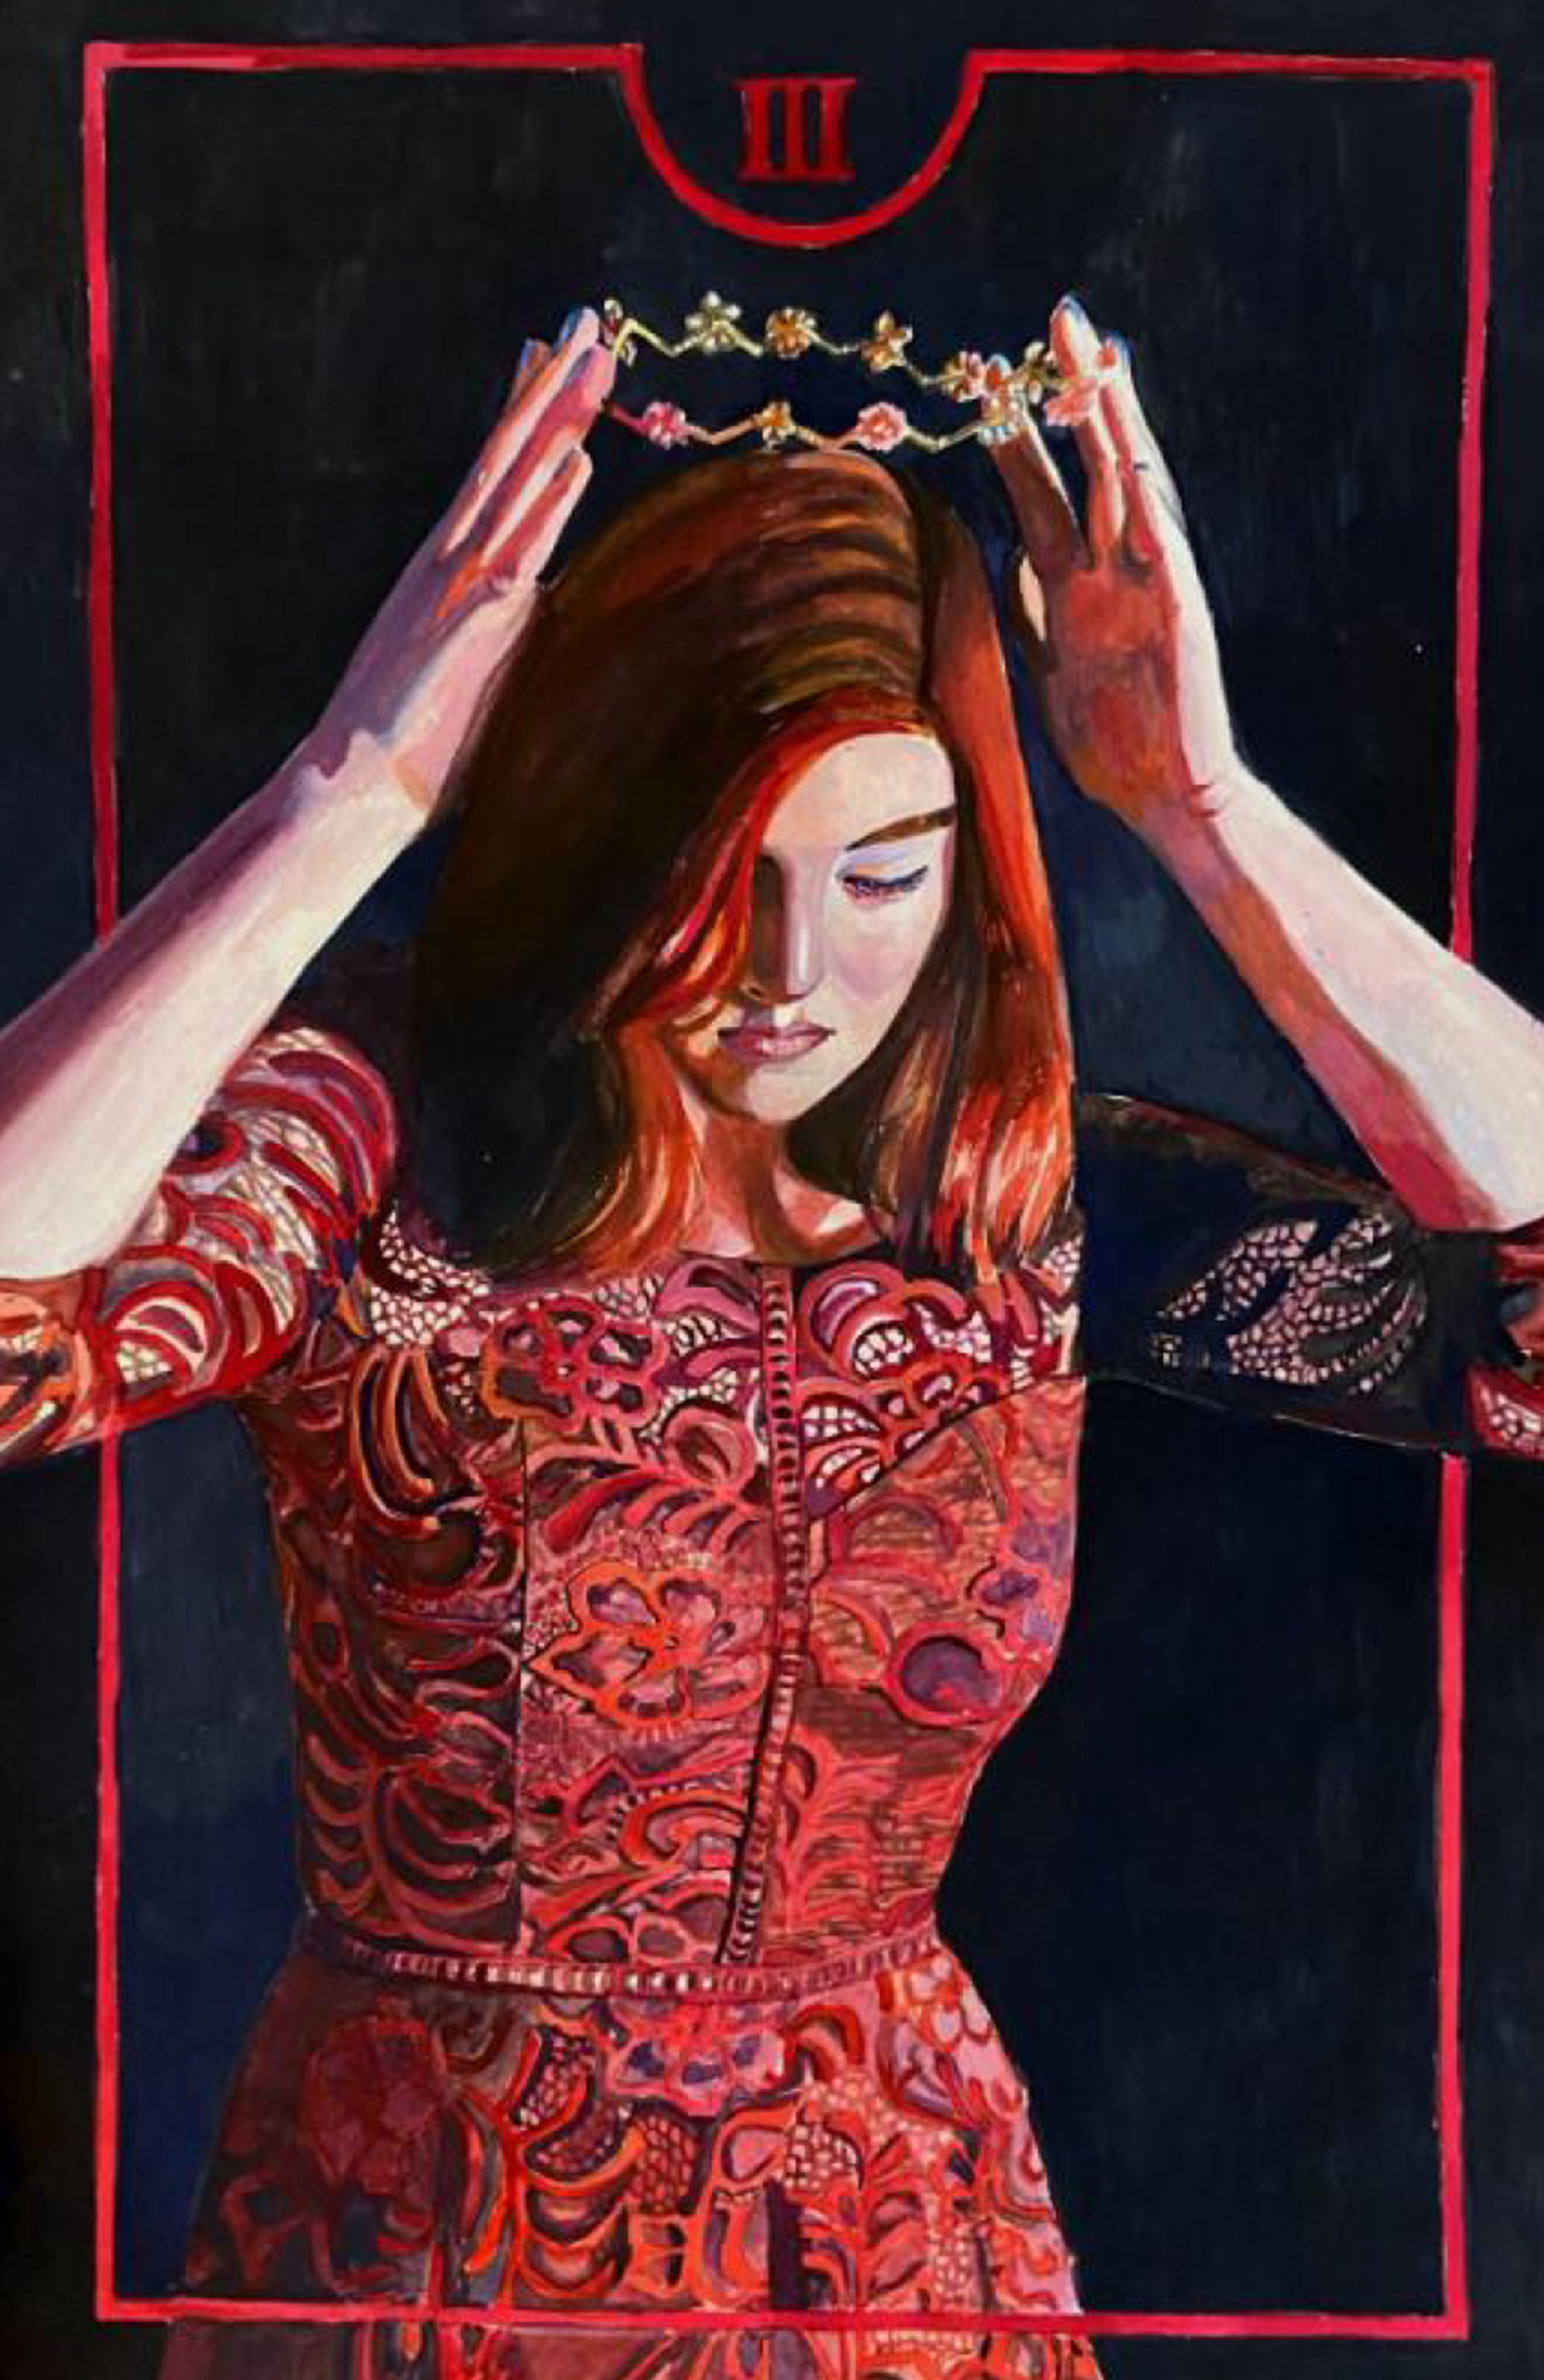 Painting of a white girl with red hair in a red dress placing a crown on her head